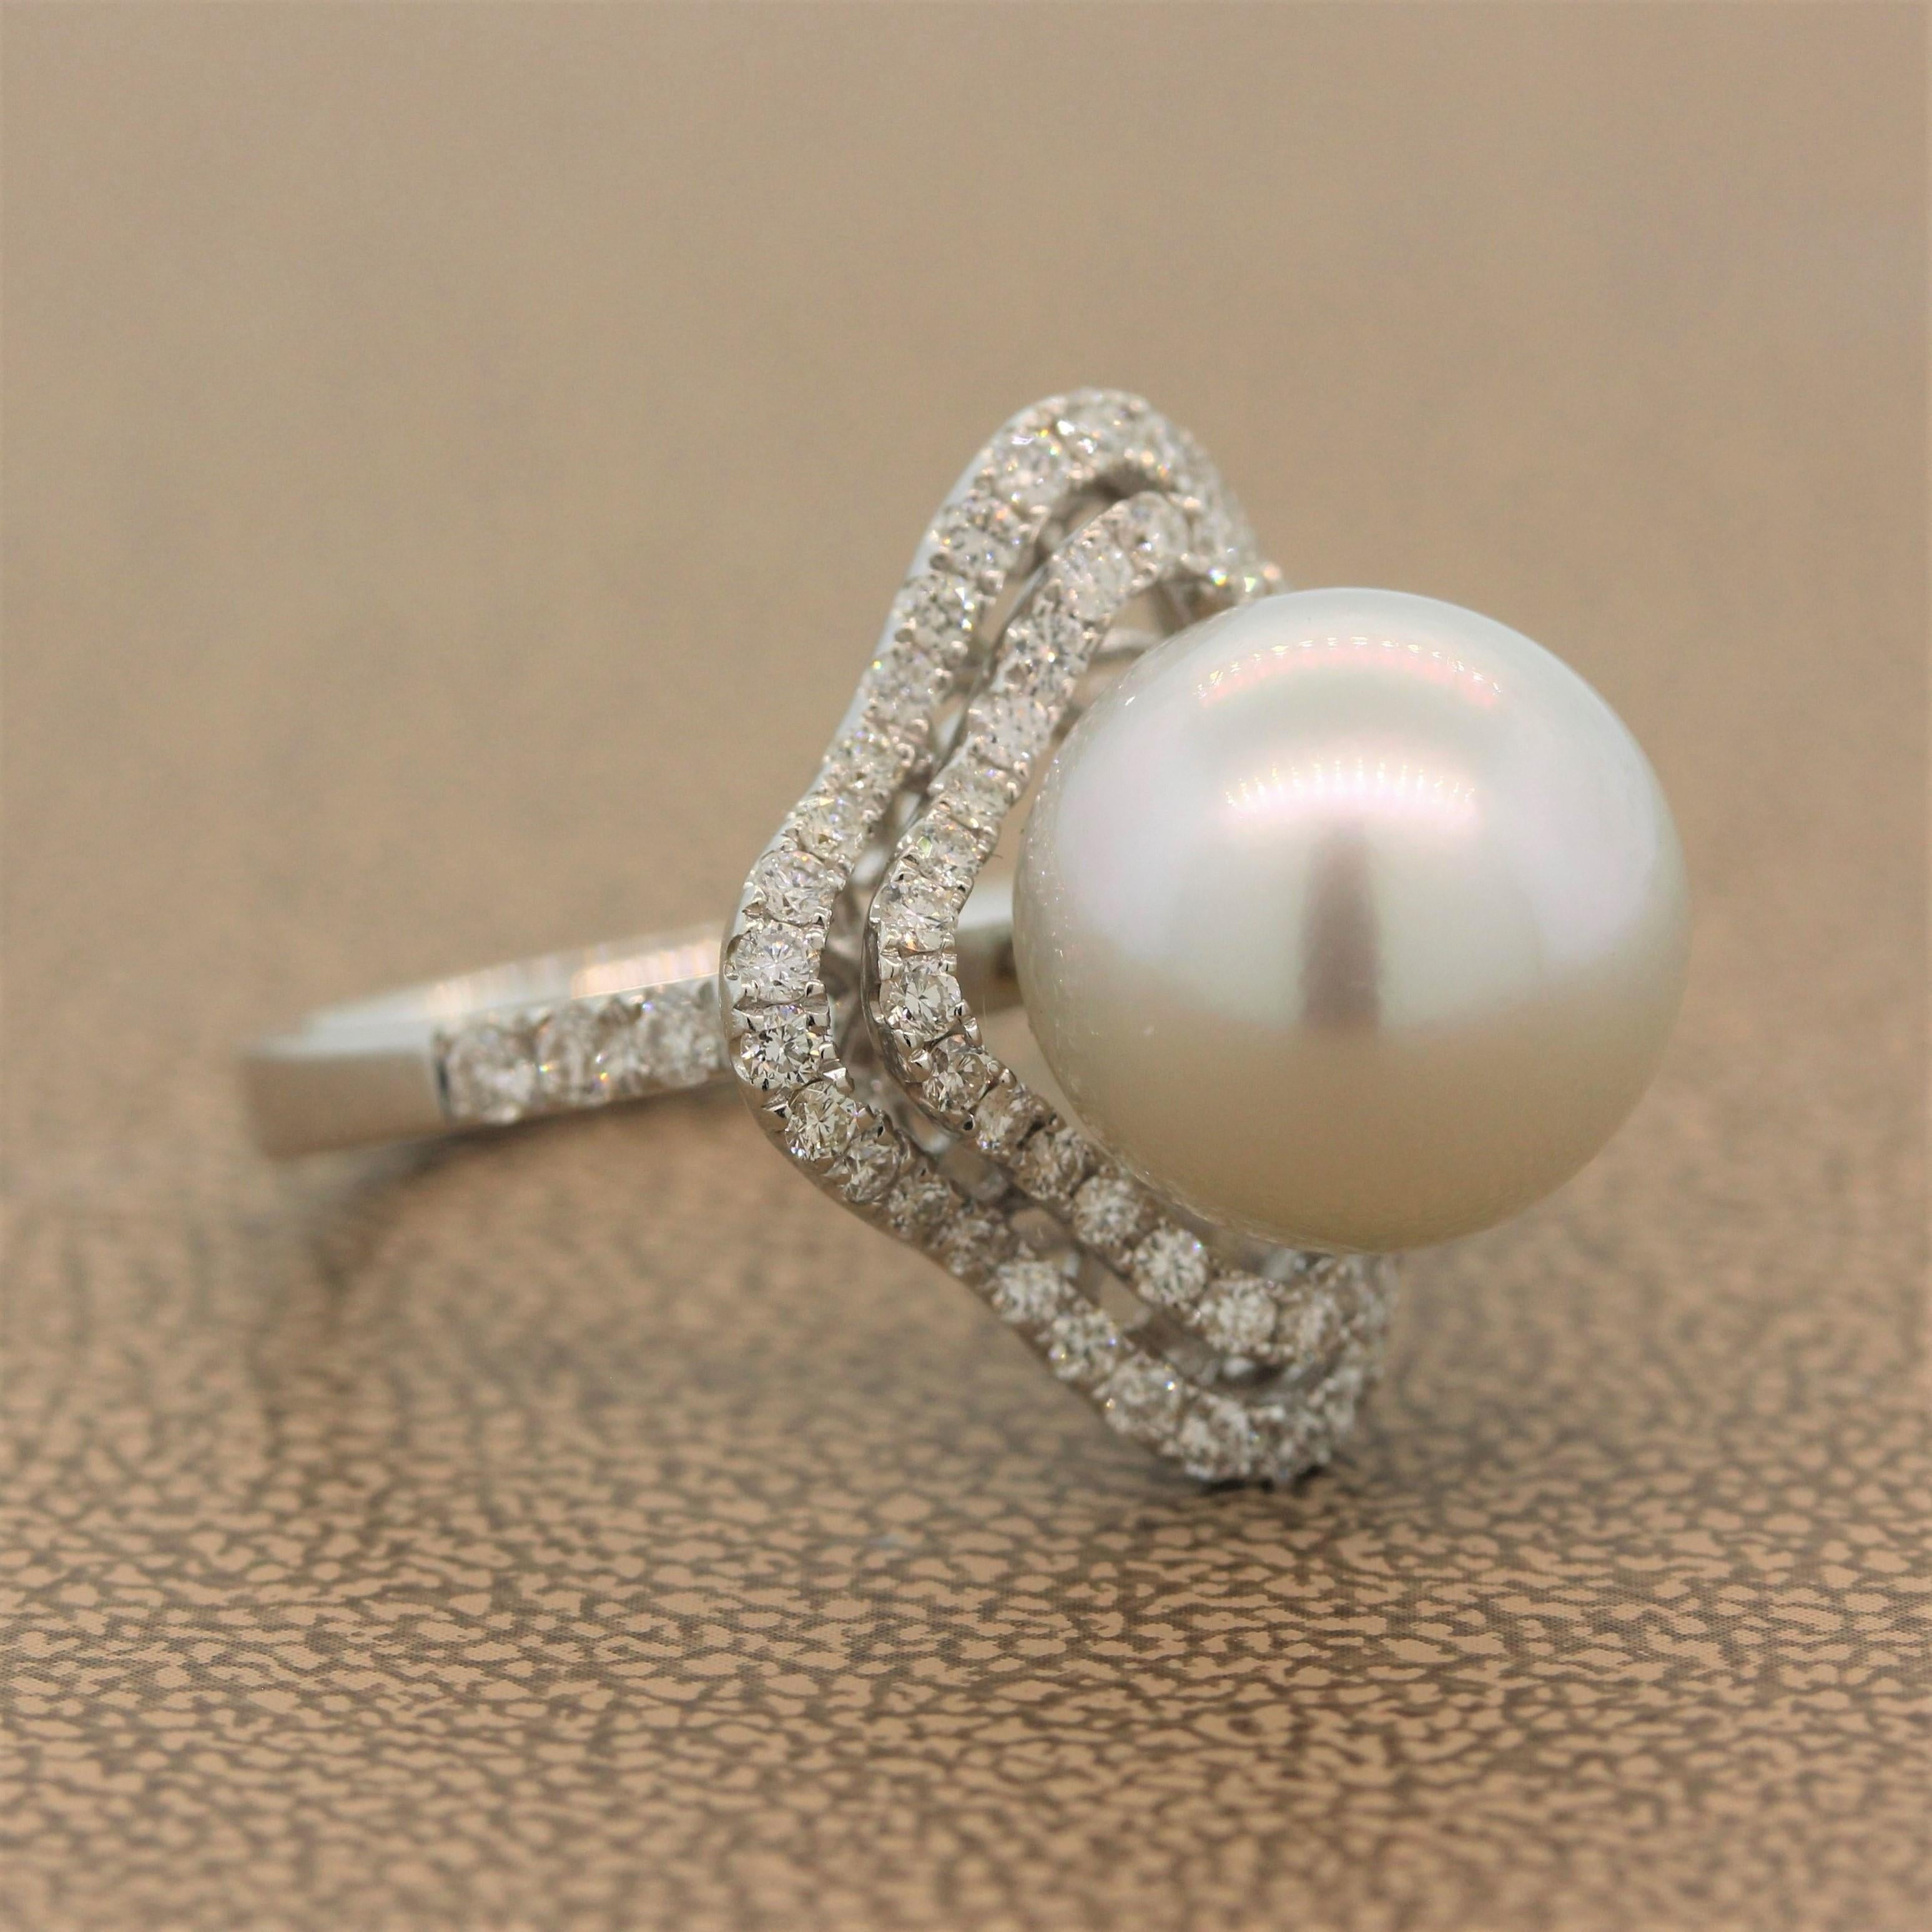 This beautiful ring features a glossy 12mm South Sea pearl surrounded by a double wavering halo of 1.16 carats of diamonds. The colorless round cut diamonds are set in an 18K white gold setting.

Ring Size 6.5 (Sizable)
